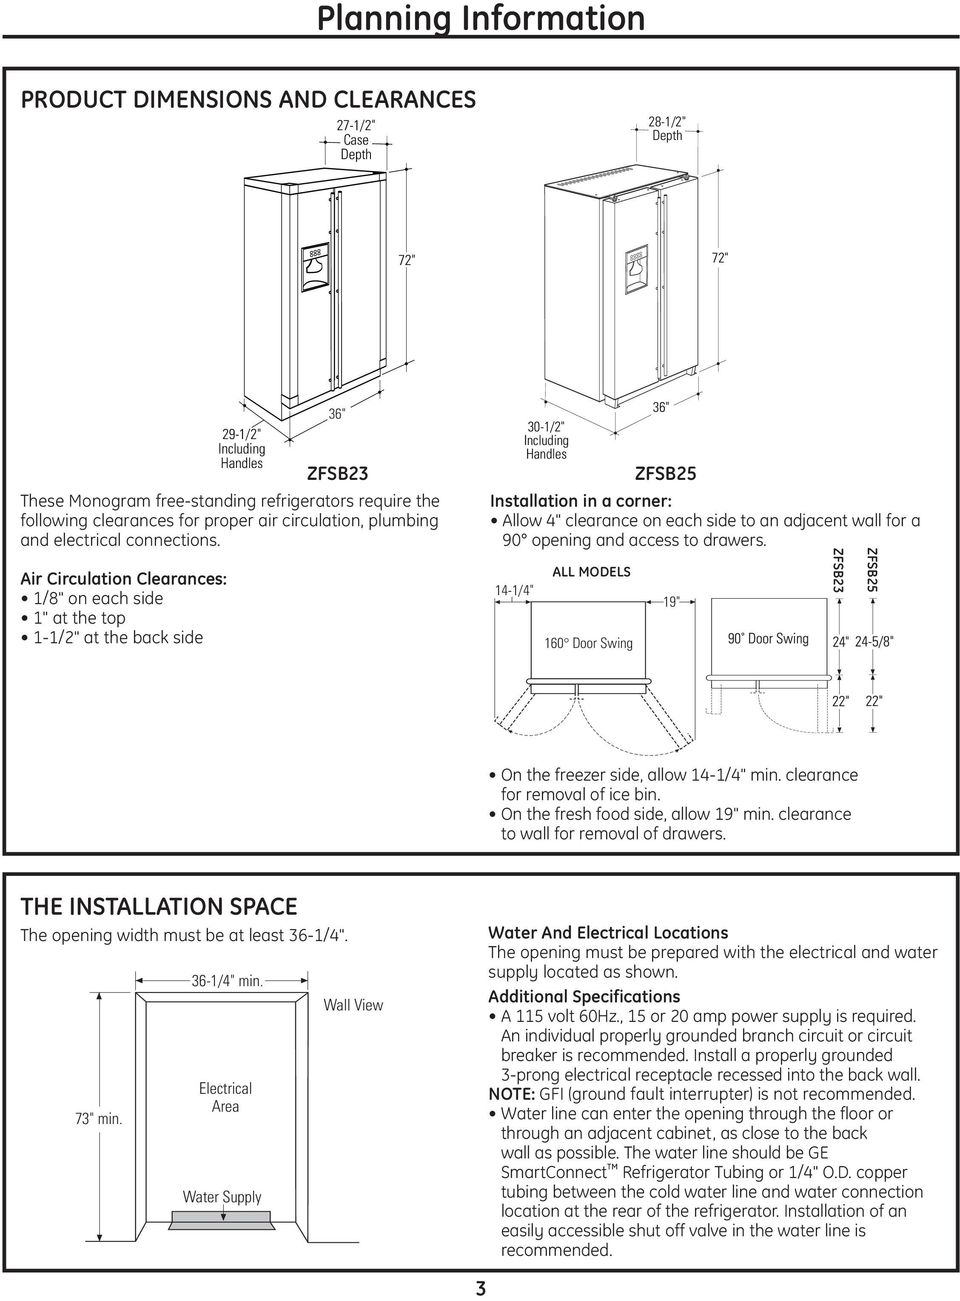 Air Circulation Clearances: 1/8" on each side 1" at the top 1-1/2" at the back side 36" ZFSB23 716Dia1 Installation in a corner: Allow 4" clearance on each side to an adjacent wall for a 90 opening